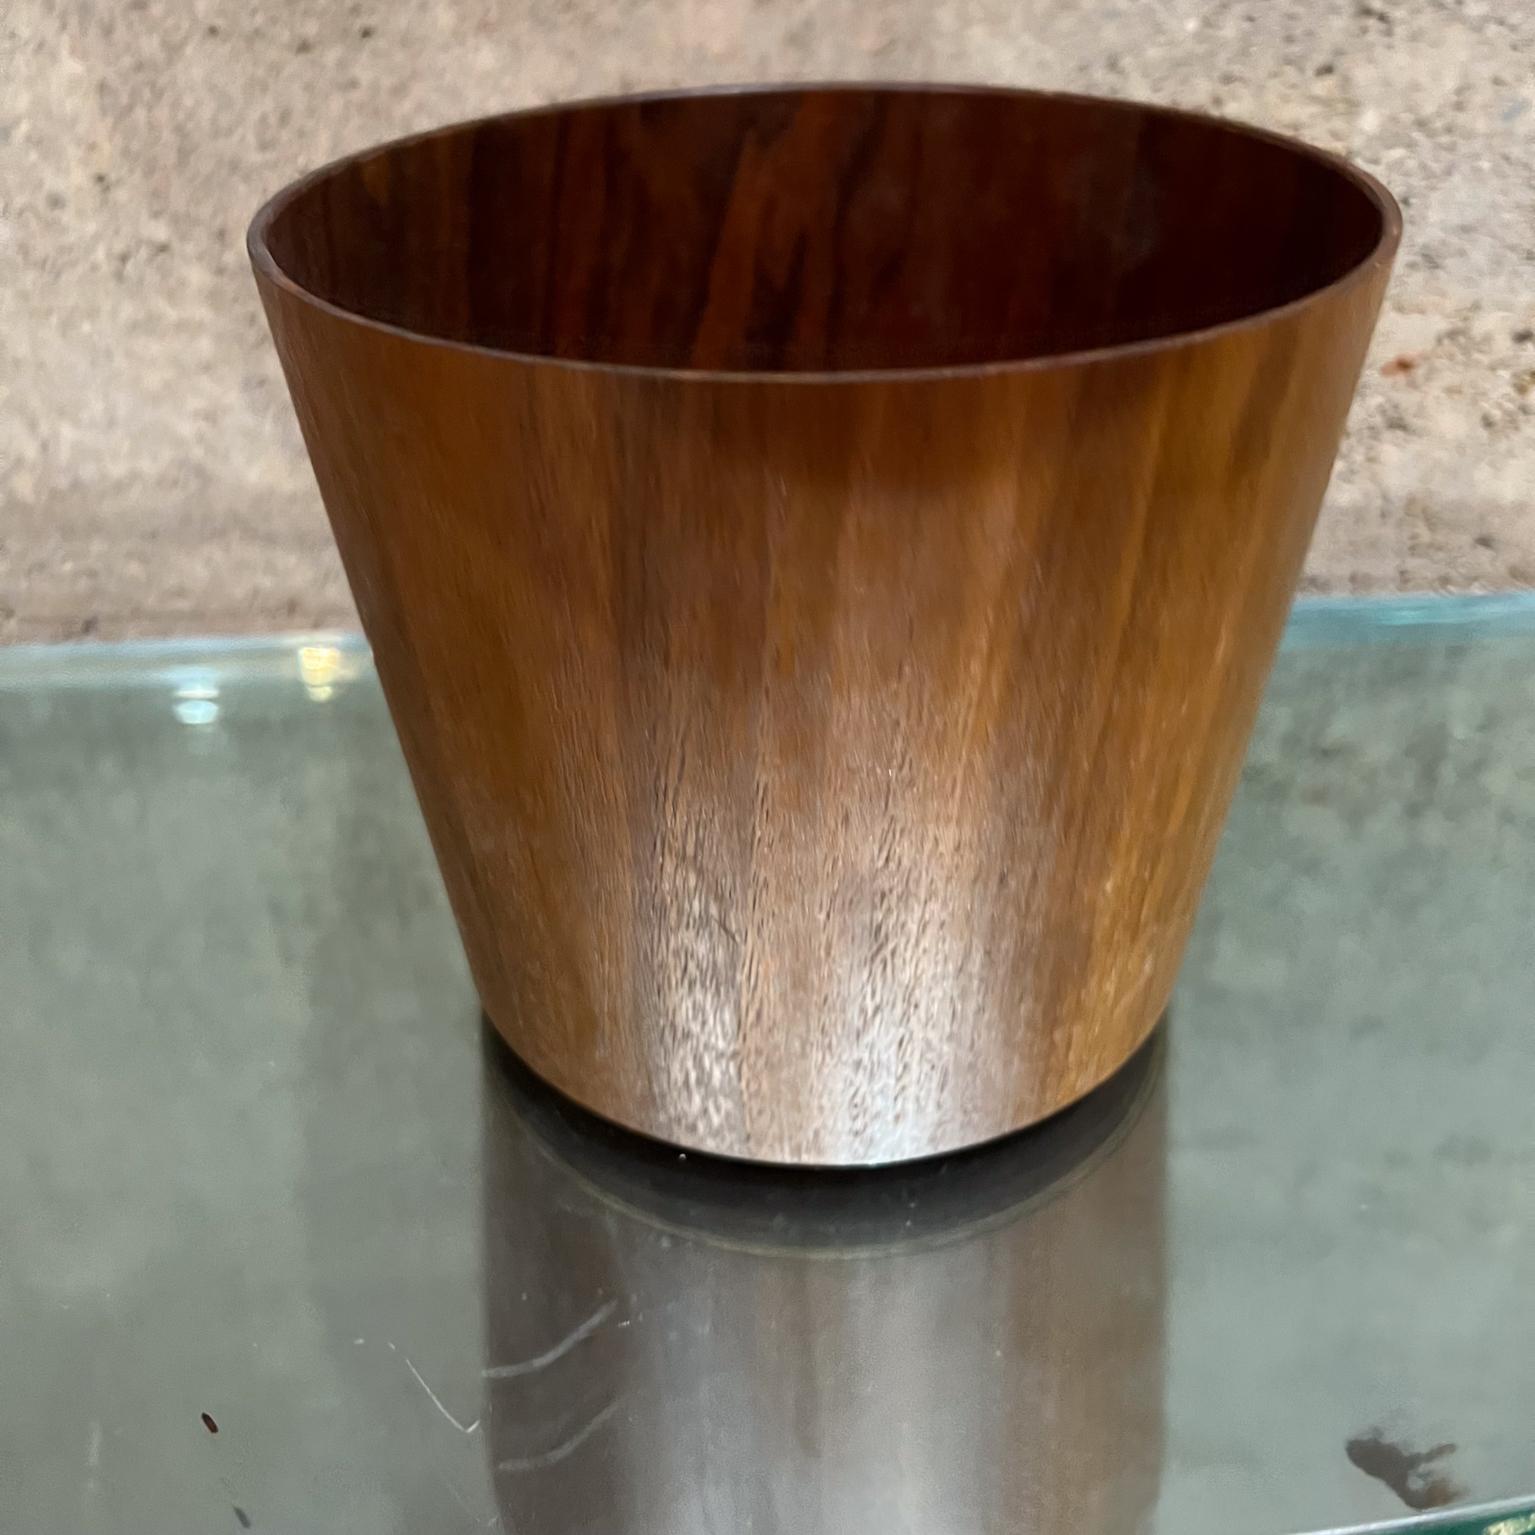 AMBIANIC presents
1960s Rainbow Servex of Sweden teak bent plywood nut bowl
interior slot for utensil cracker holder.
shows beautiful wood grain.
6x diameter (top) x 5 height
Original unrestored good vintage preowned condition.
Review images